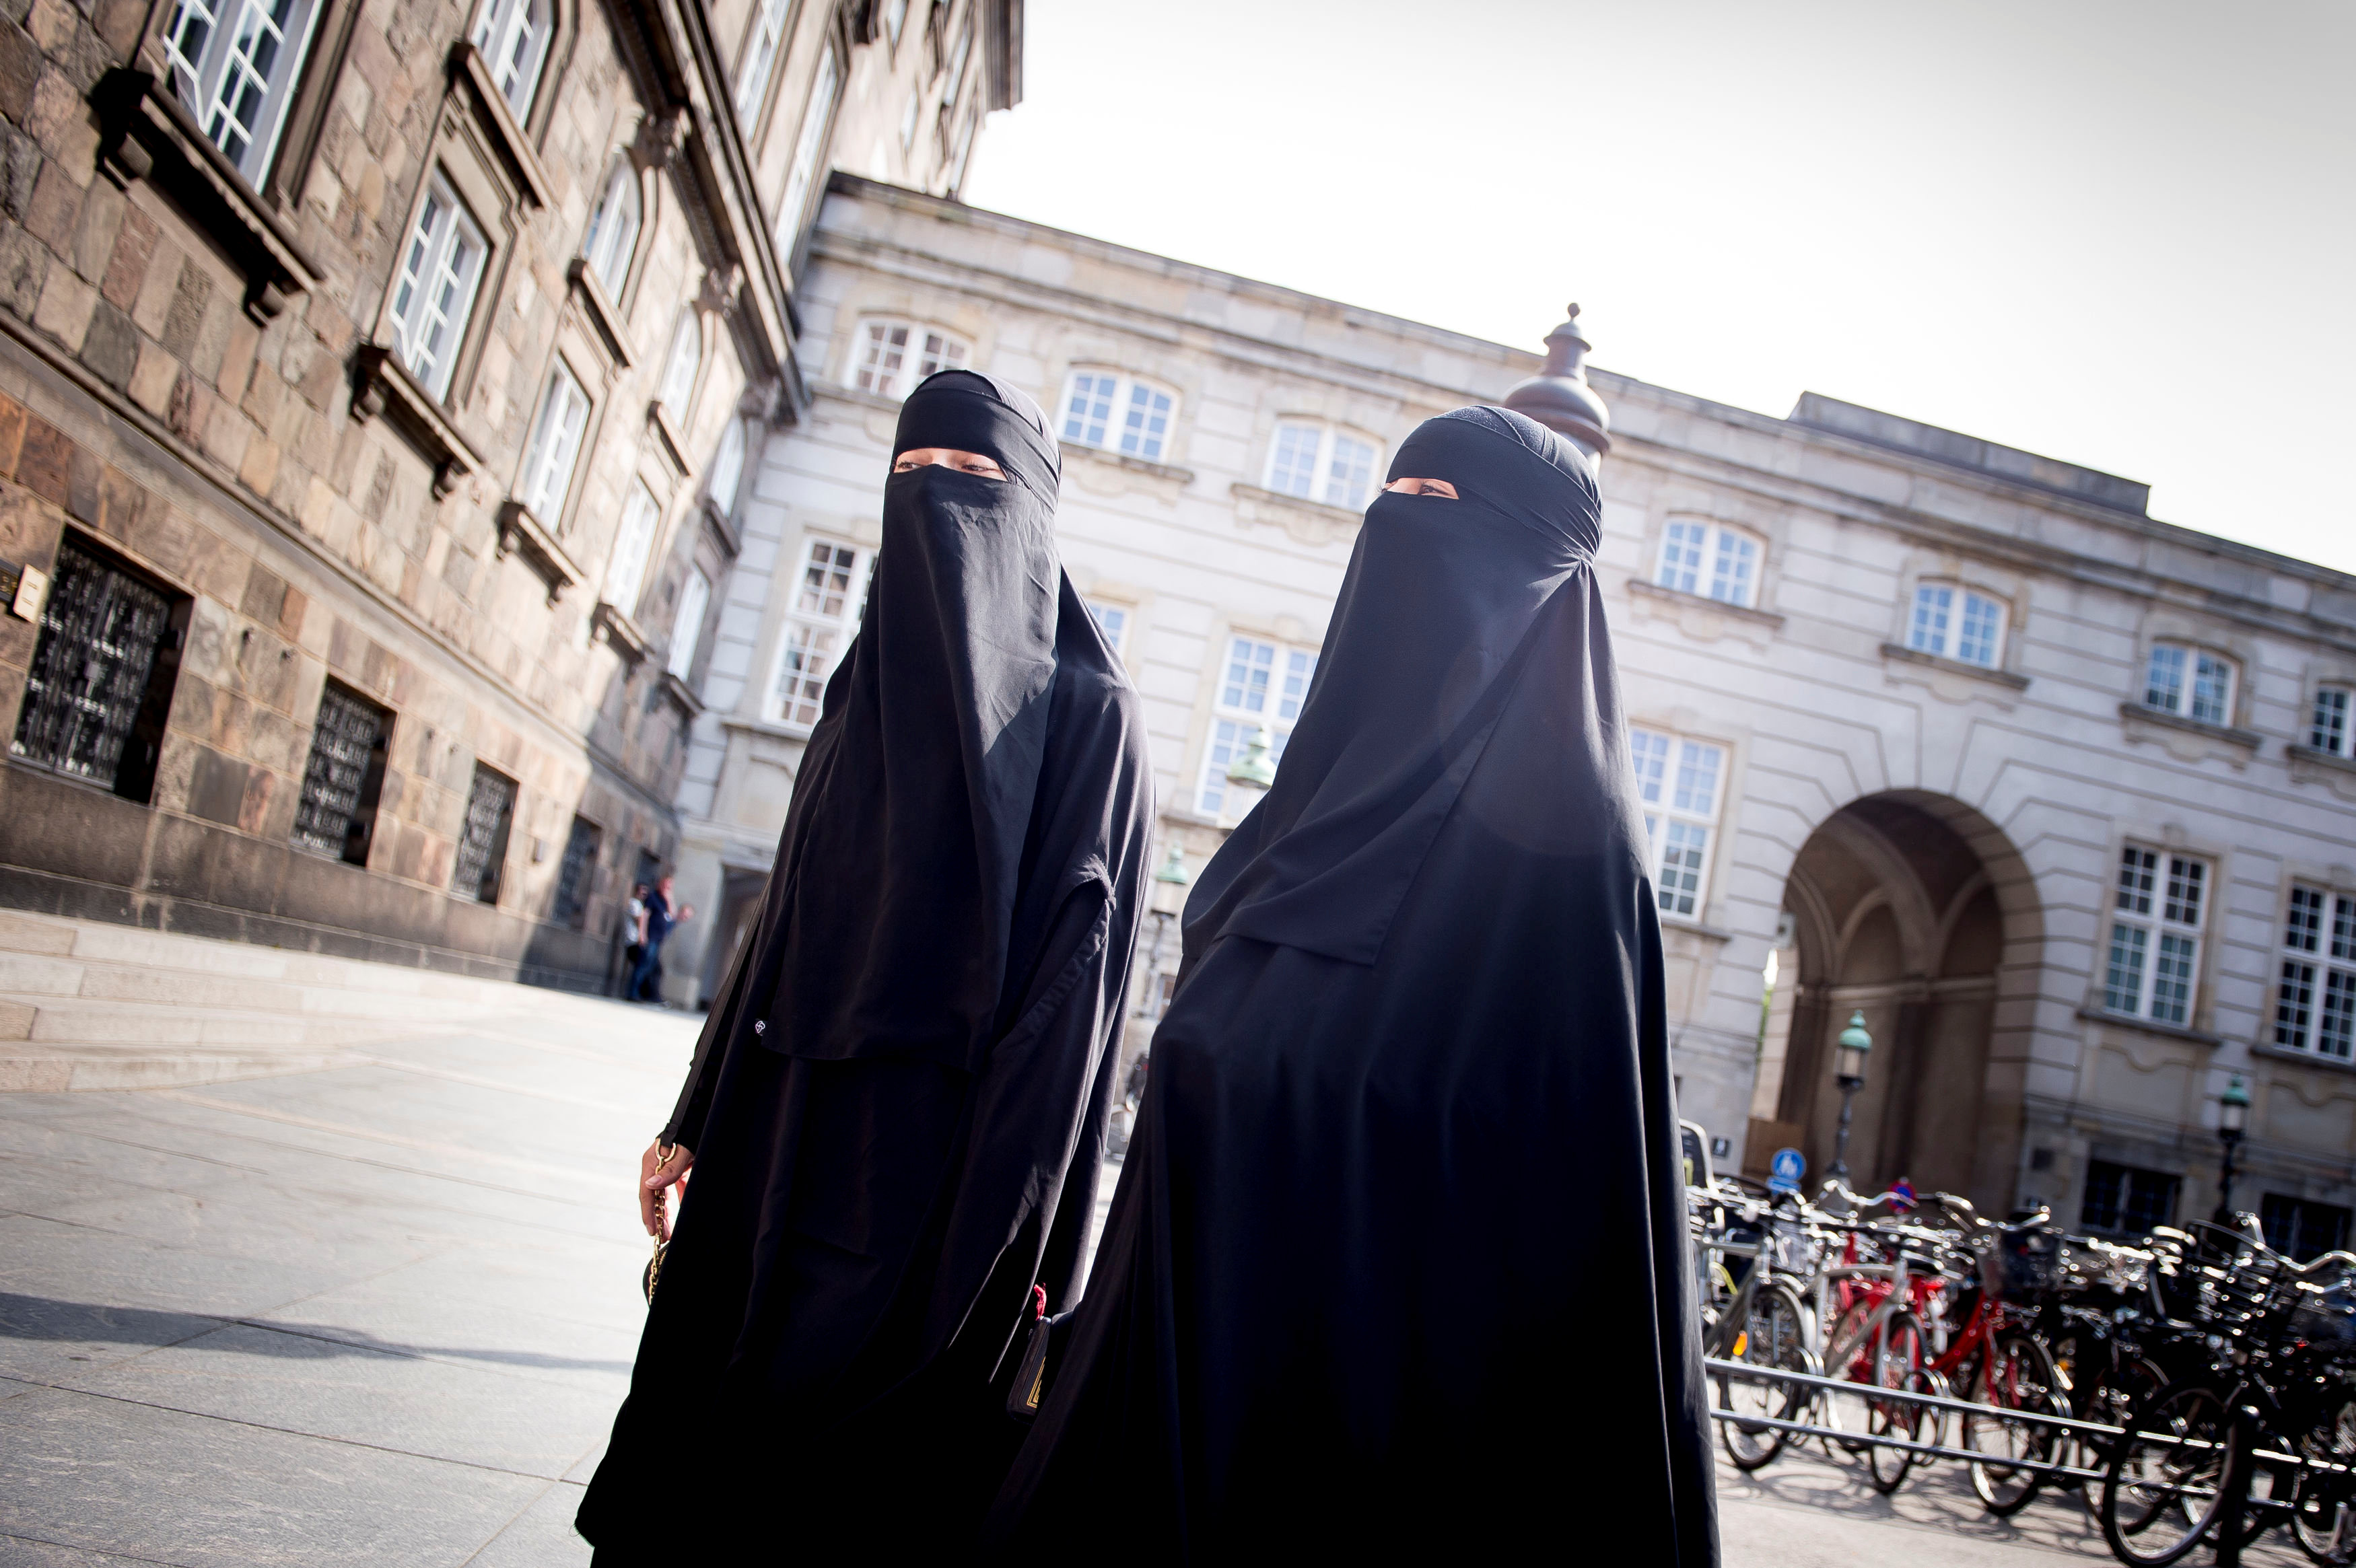 As of August 1, wearing a burqa, which covers a person's entire face, or the niqab, which only shows the eyes, in public carries a fine of 1,000 kroner in Denmark. u00e2u20acu2022 Reuters pic